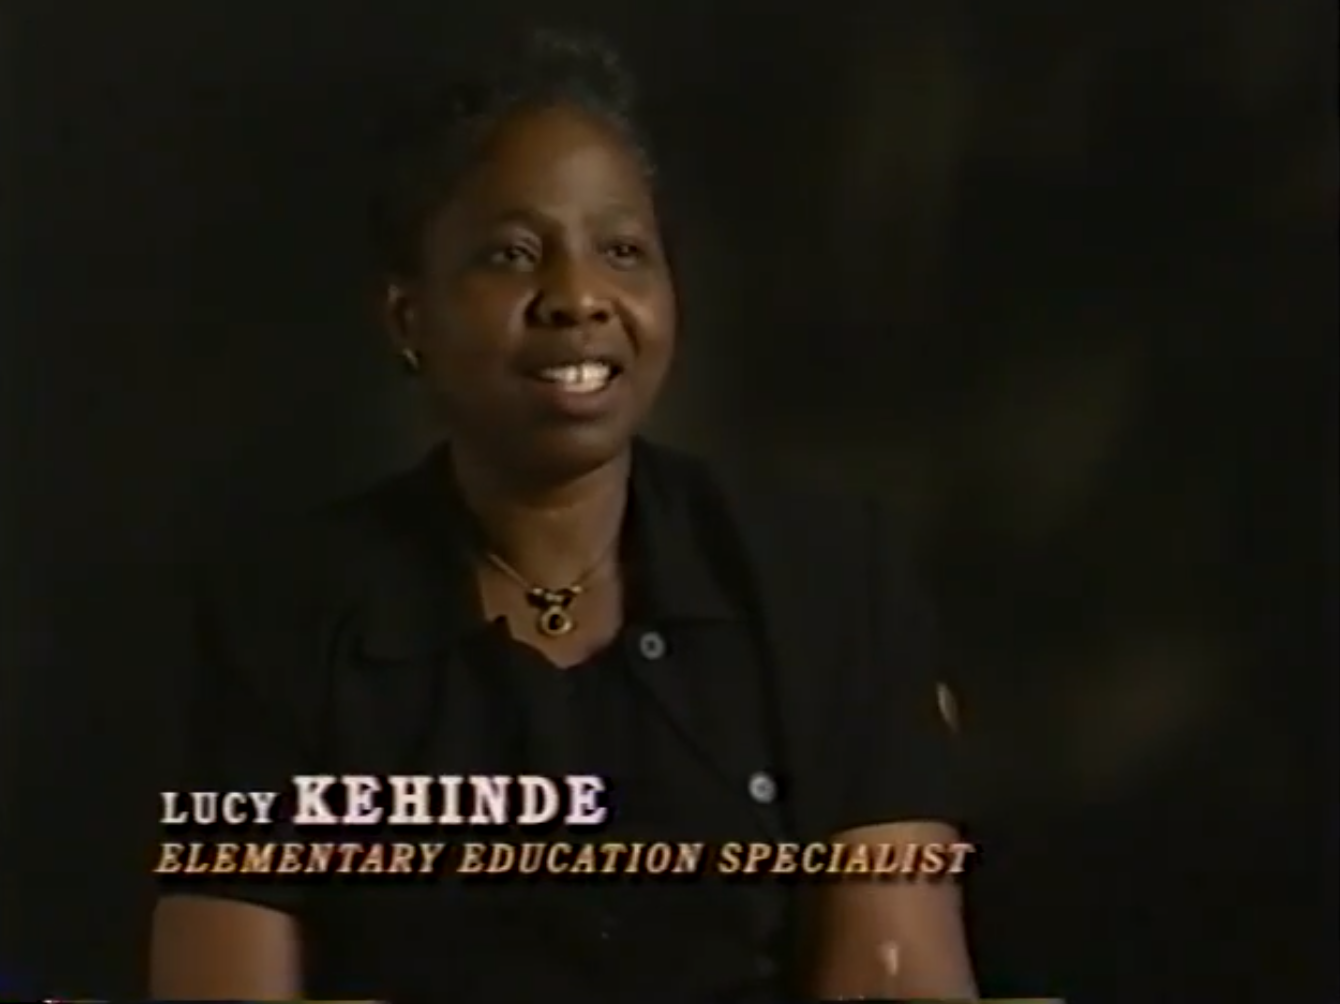 Lucy Kehinde